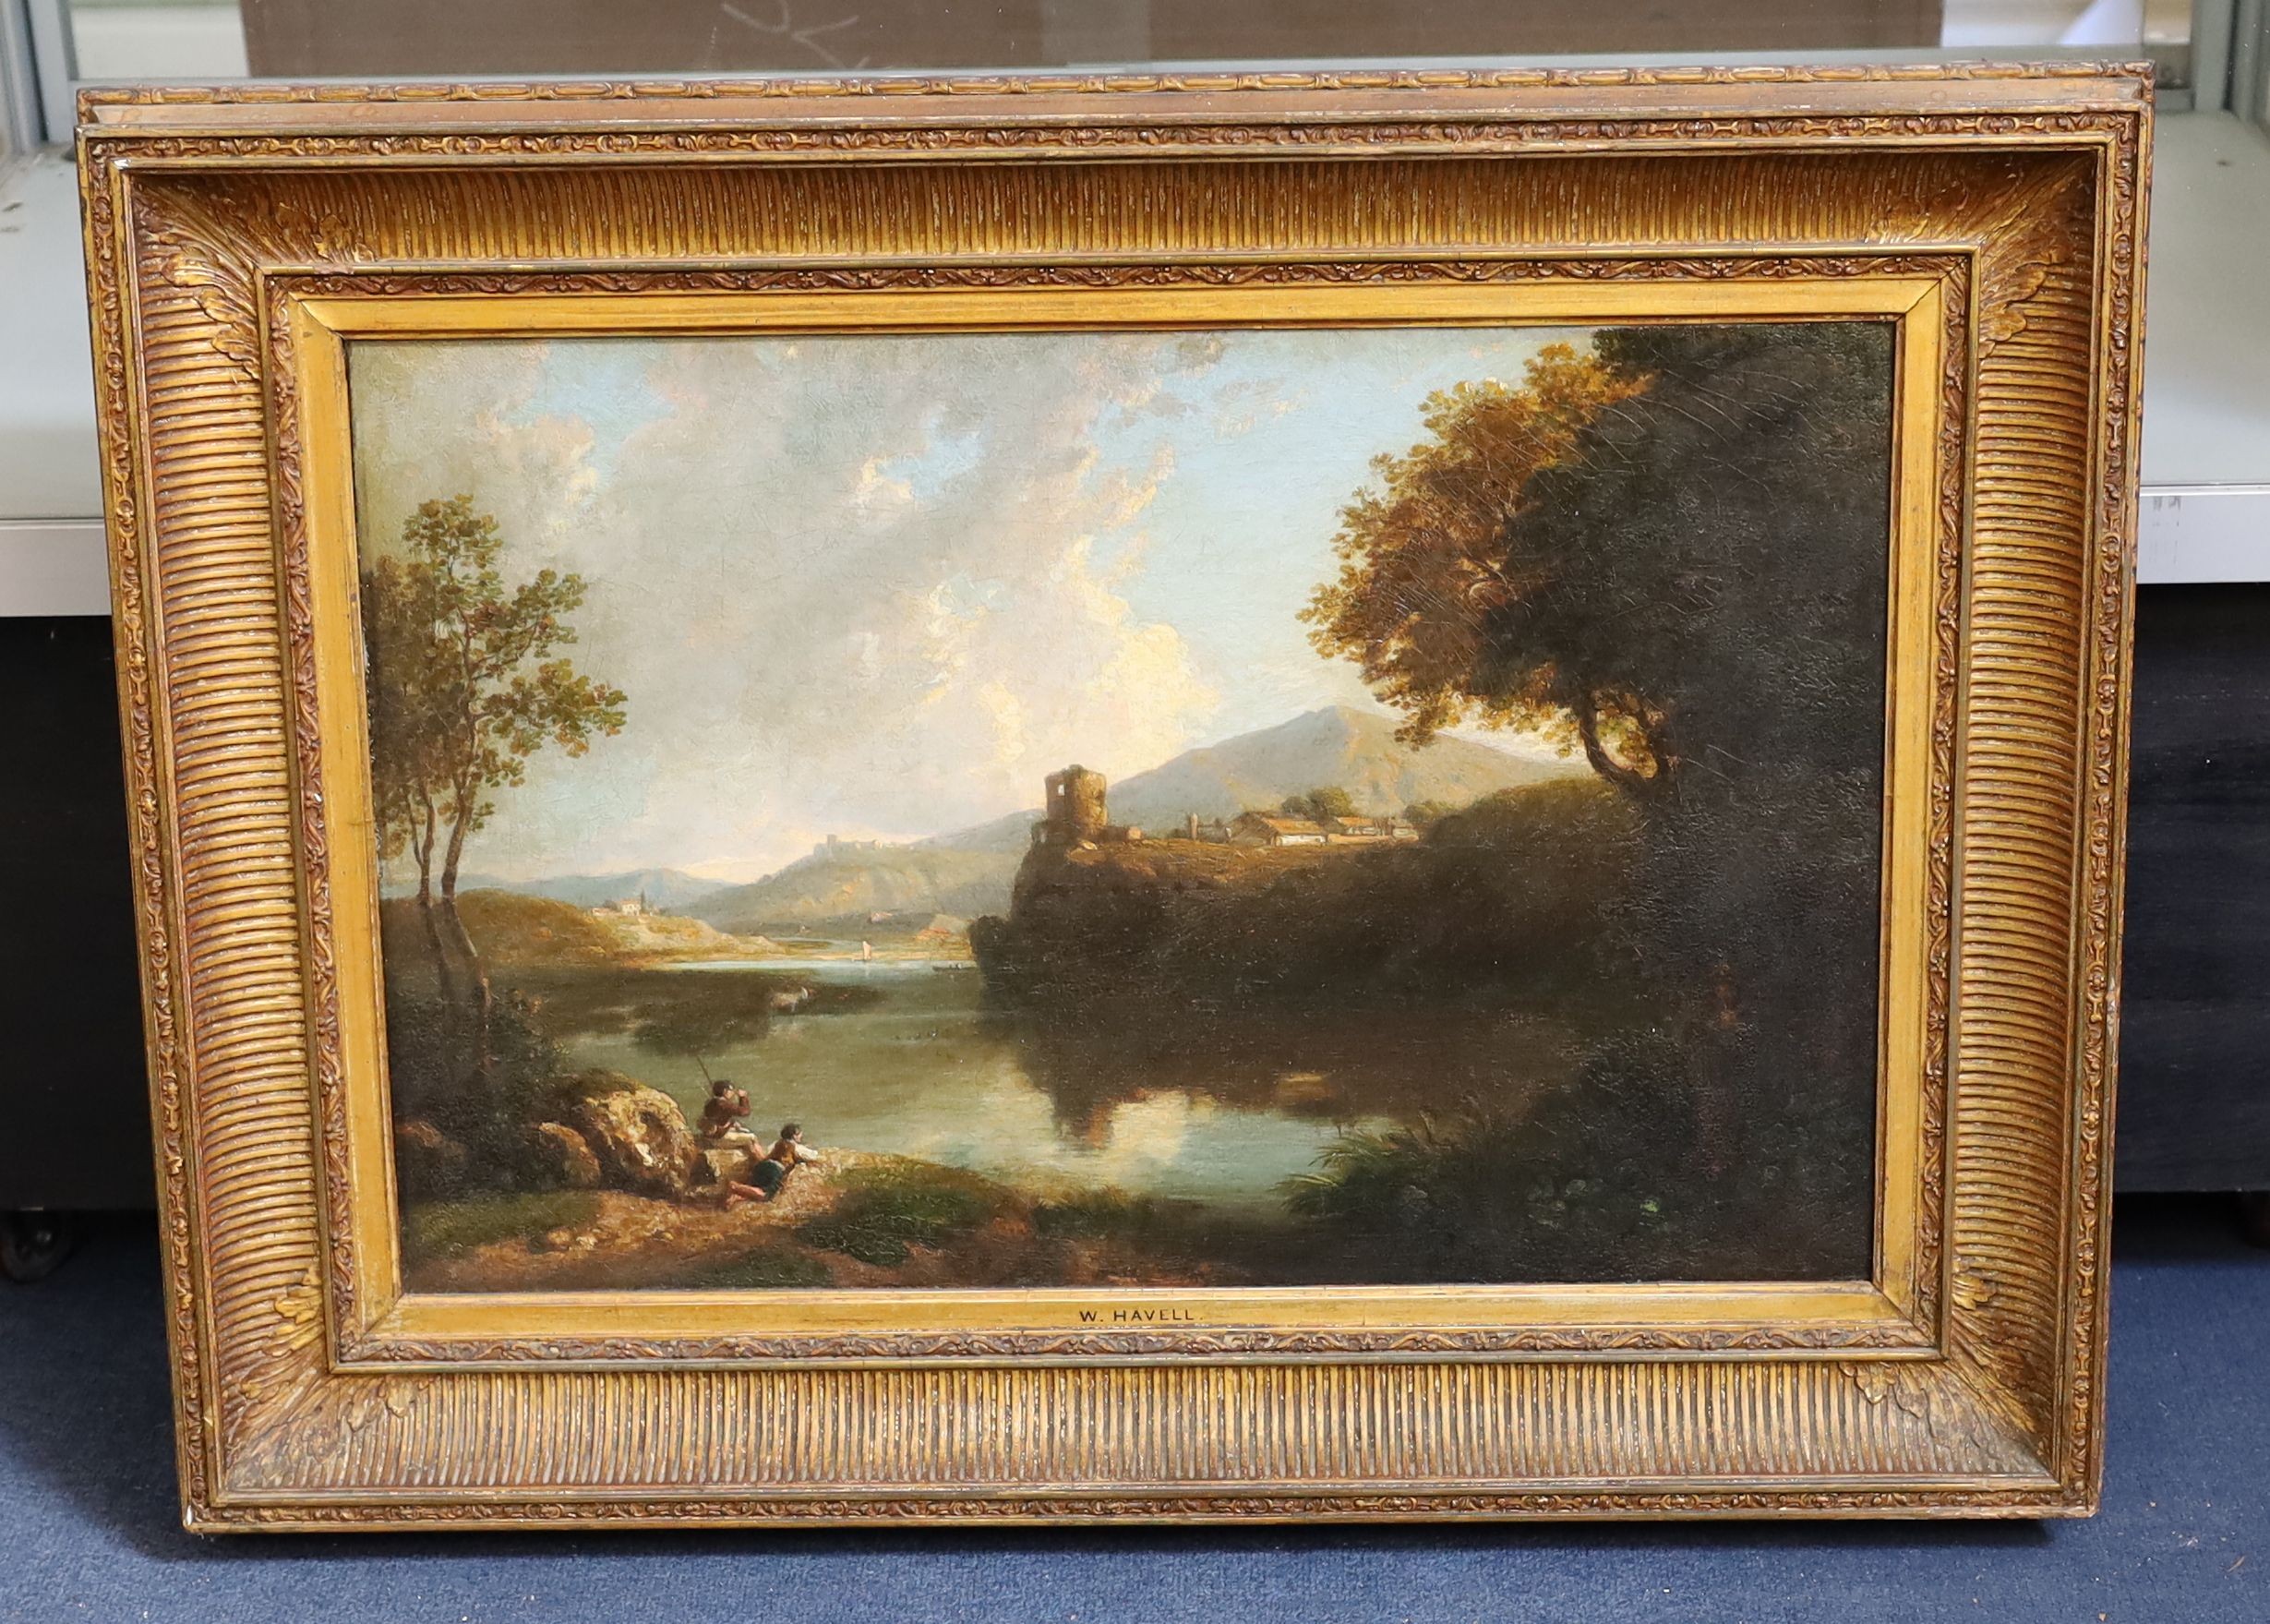 Circle of William Havell (1782-1857), Italianate river landscape with boys in the foreground, oil on canvas, 40 x 62cm